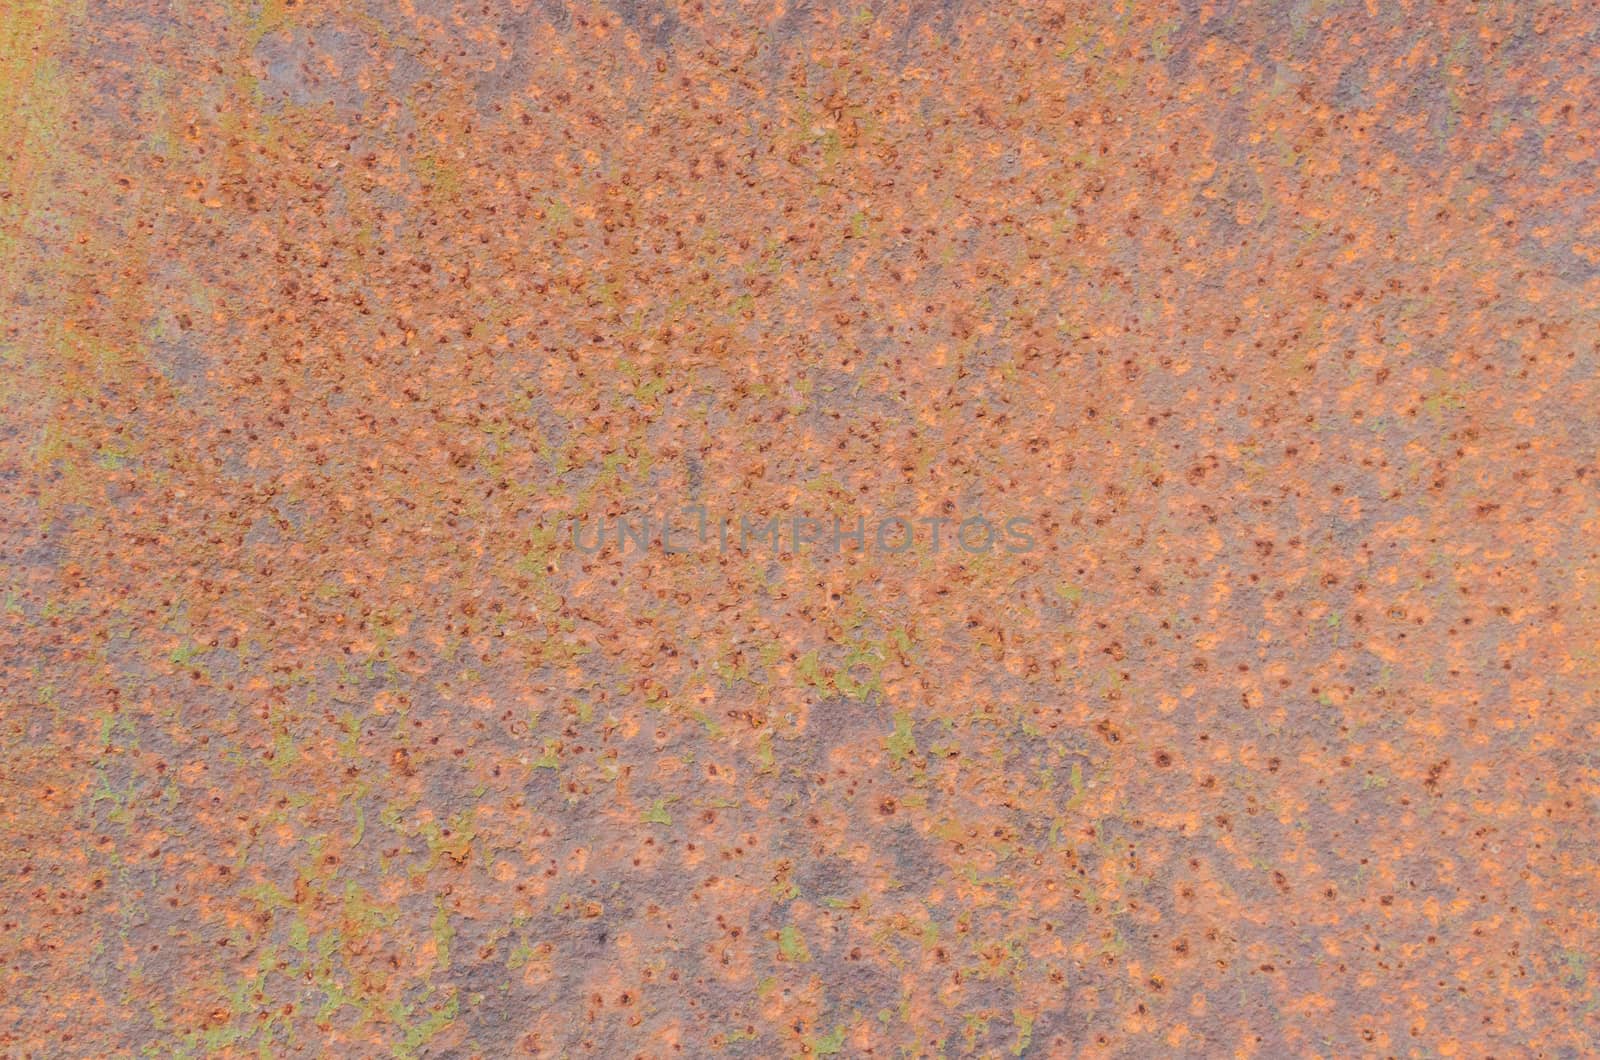 Iron surface rust texture and background .